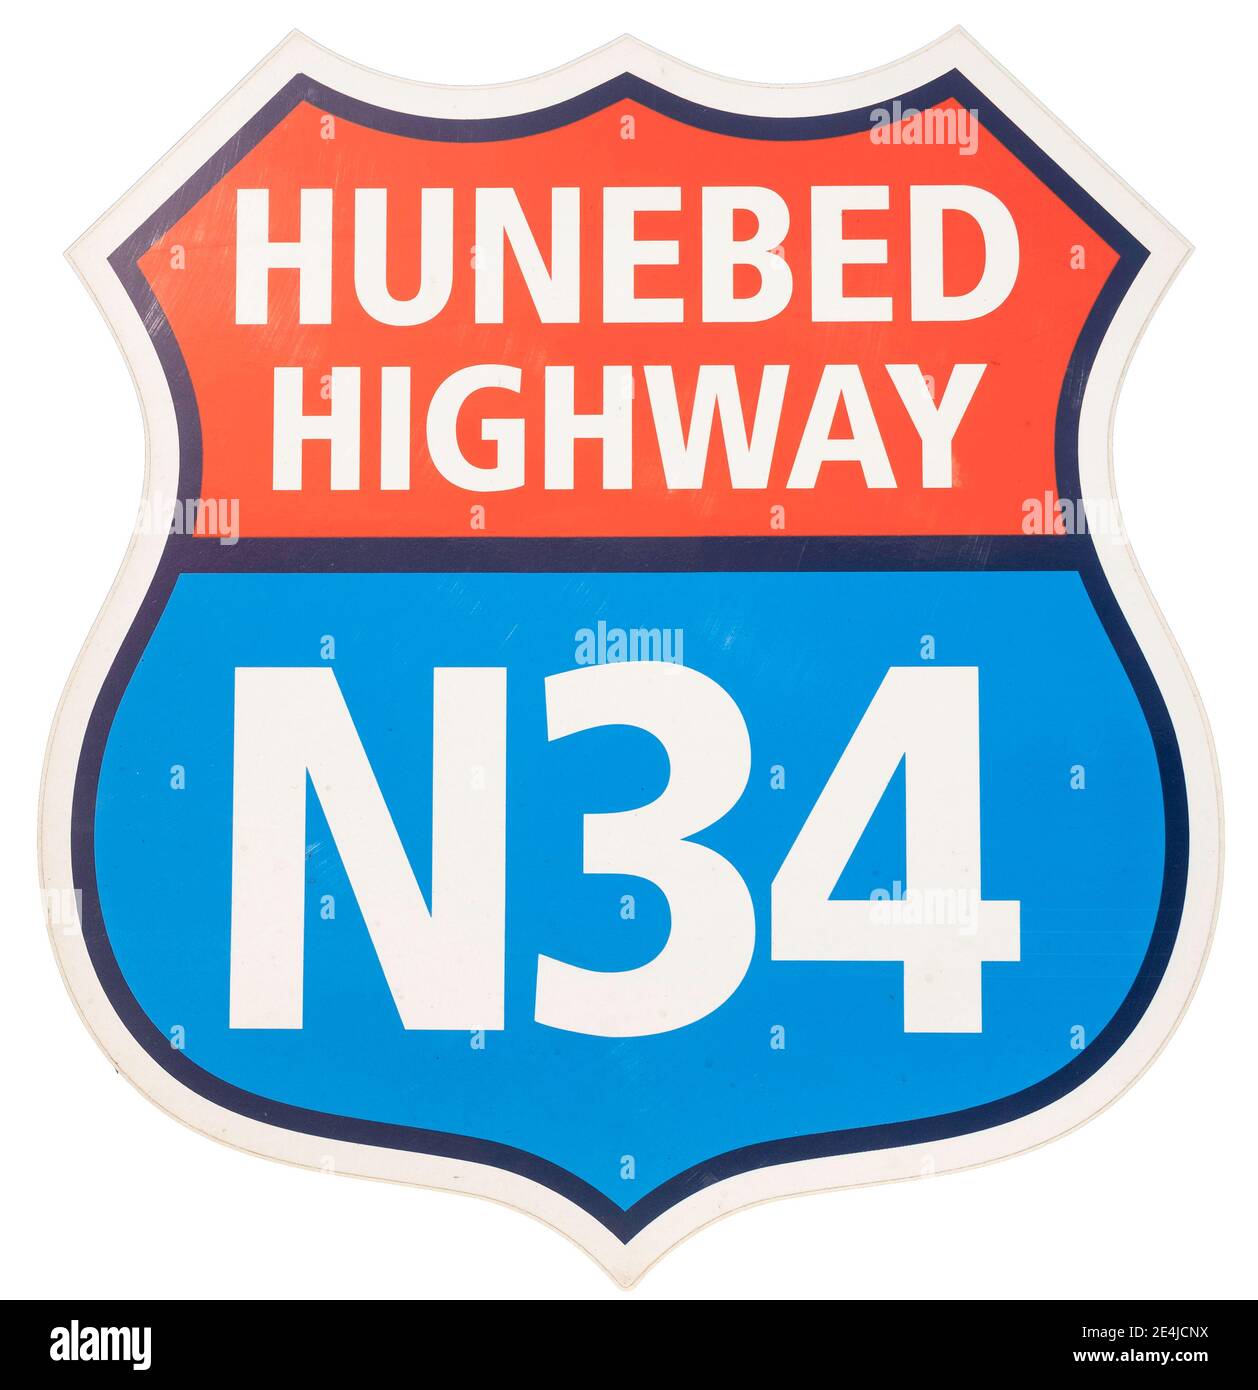 Road sign of historical route Hunebed Highway N34, between Zuidlaren and Coevorden in Hondsrug area in Dutch province Drenthe. Isolated oin white Stock Photo